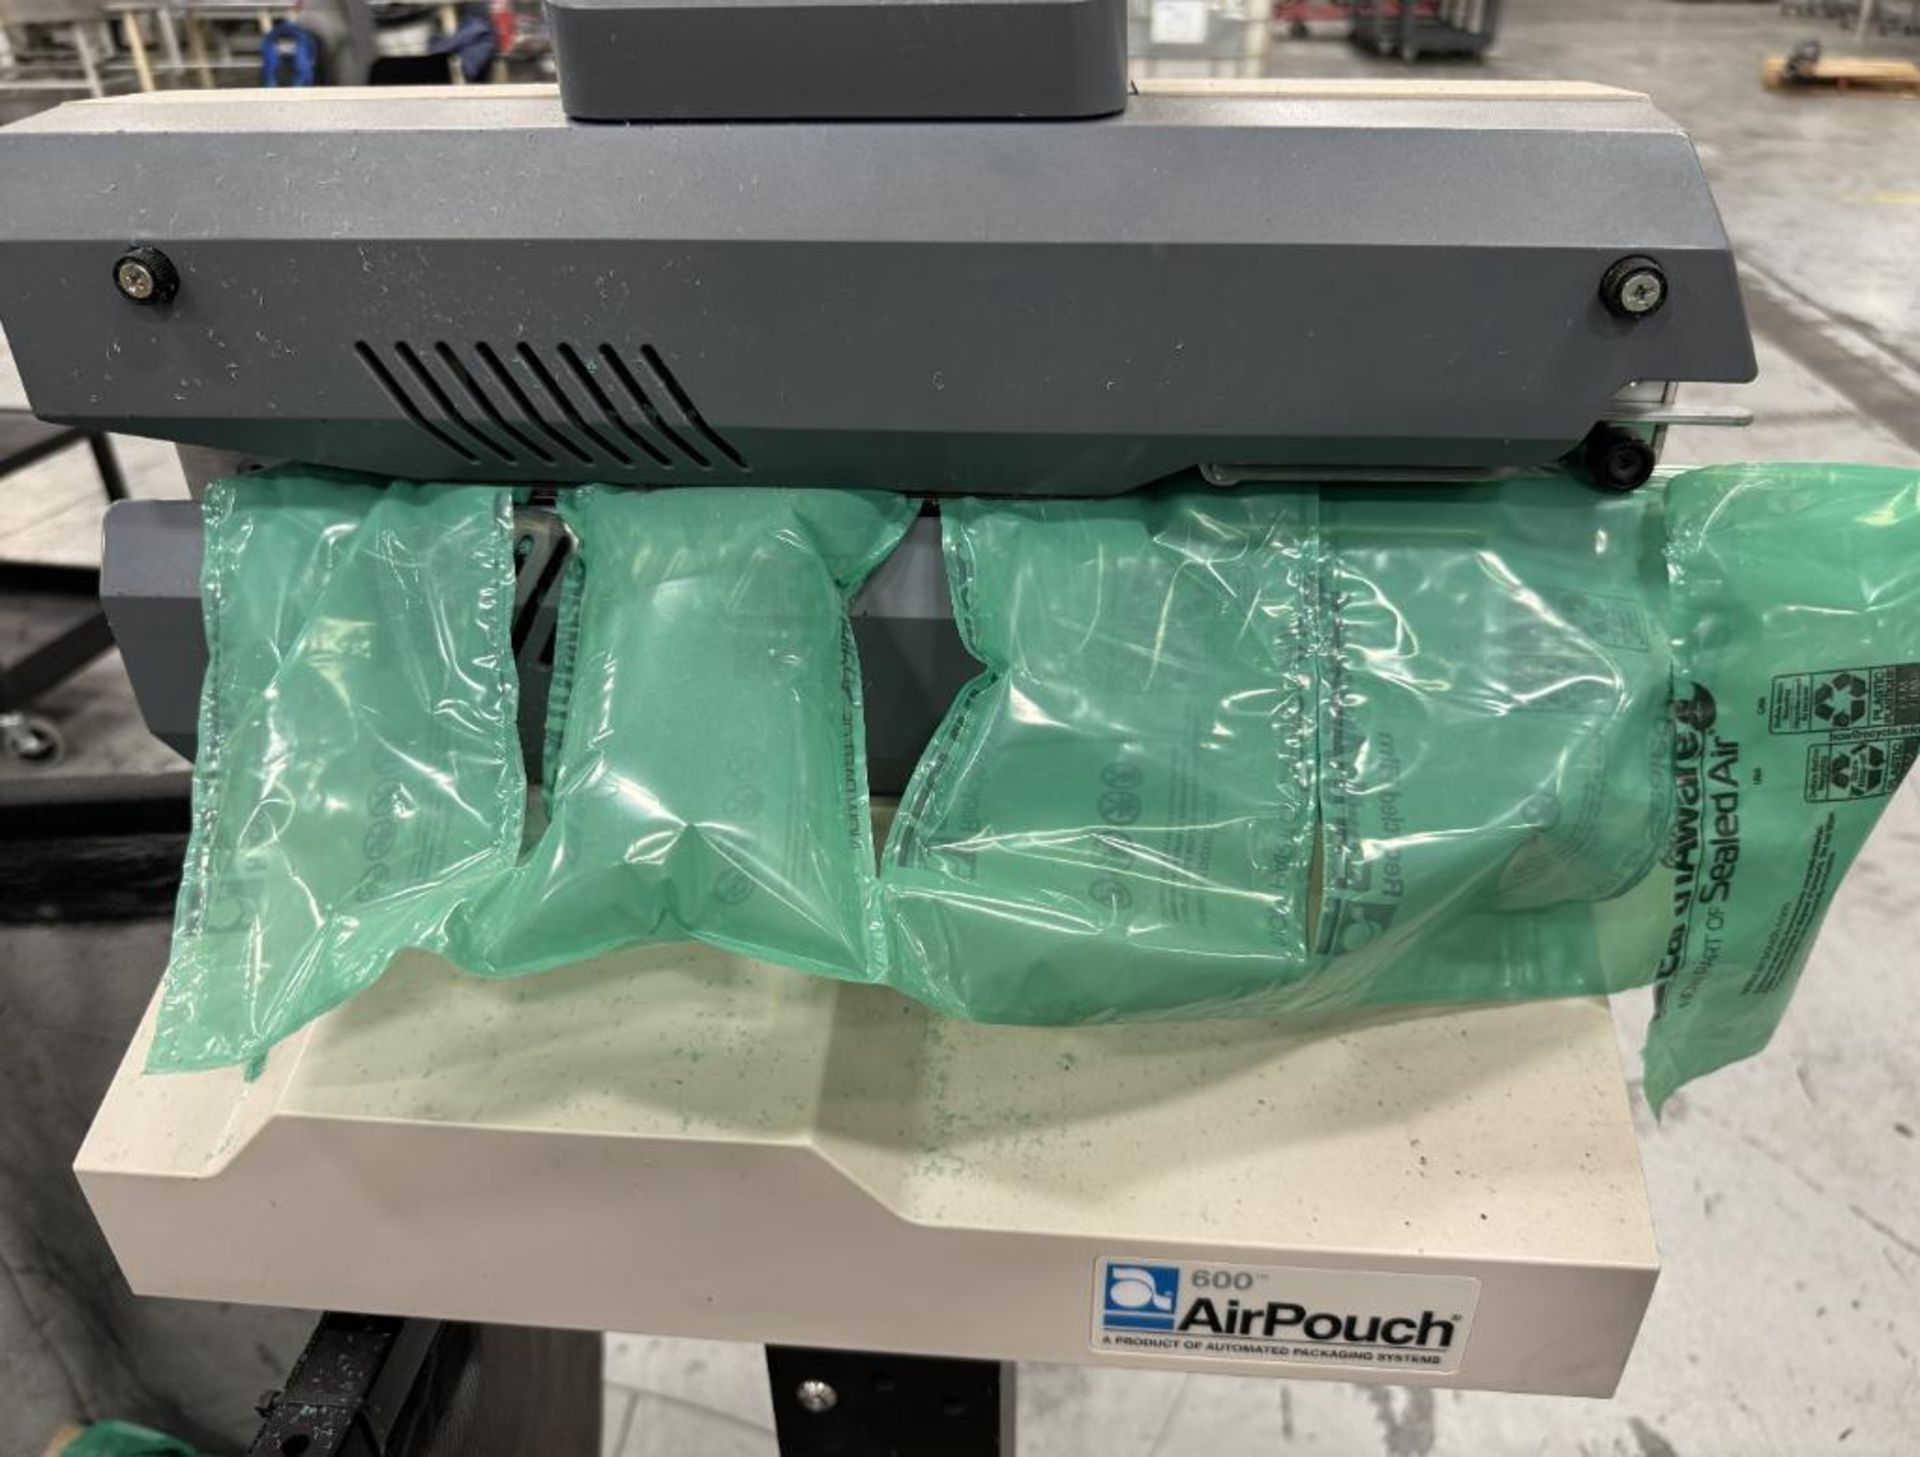 Automated Packaging Systems 600 AirPouch, Built 2019. - Image 4 of 6